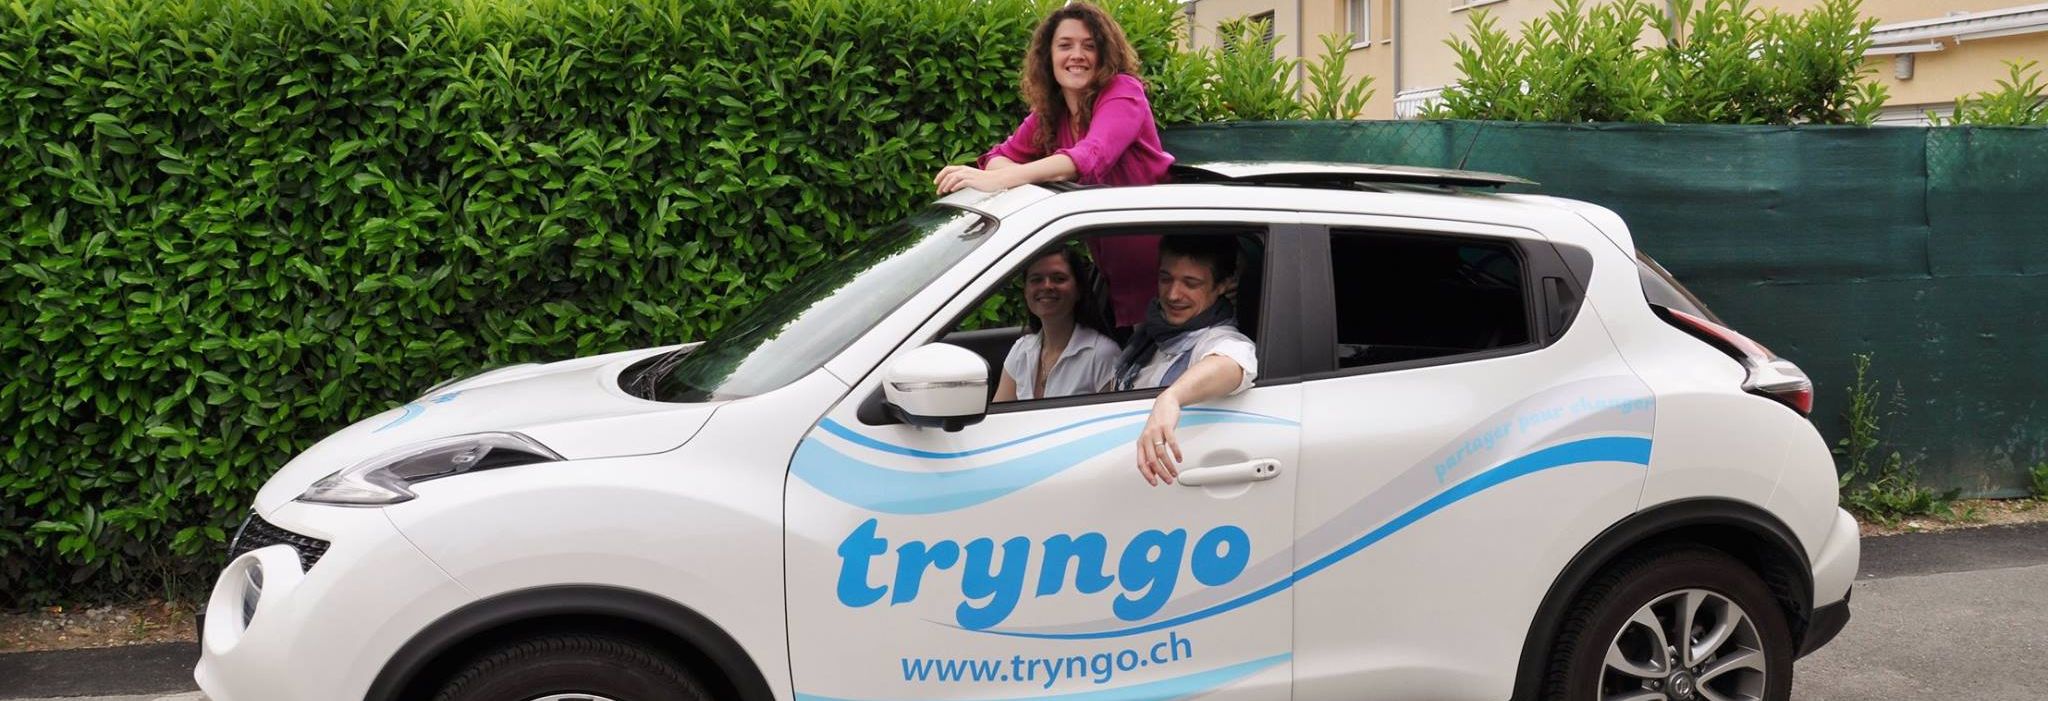 Centralized sharing platform Tryngo launched successfully